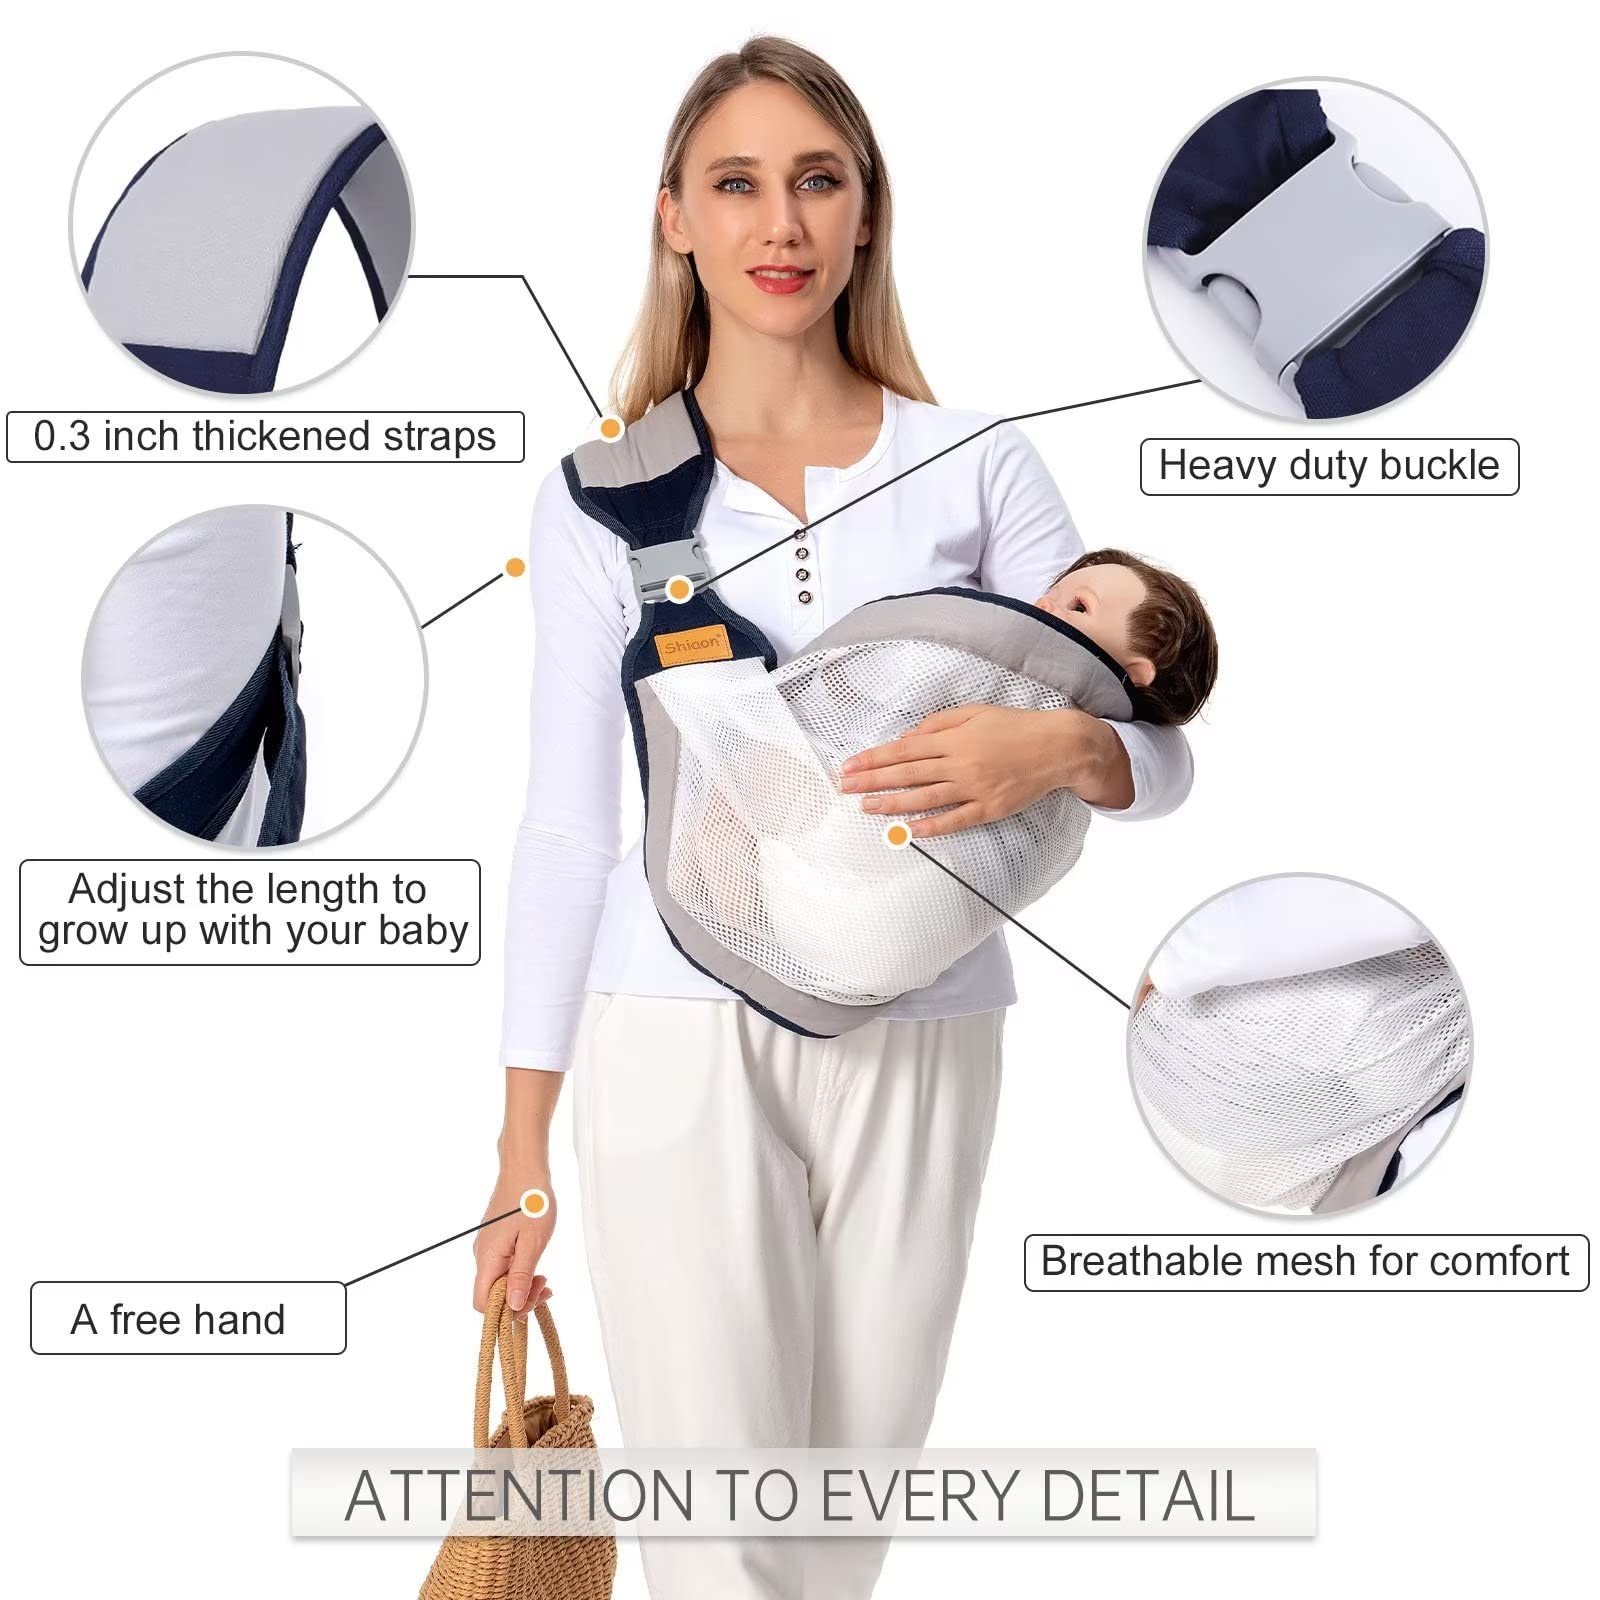 Shiaon Baby Sling Carrier One Shoulder Carrier for Toddler, Lightweight Baby Carrier Sling Newborn to Toddler, Mesh Baby Hip Carrier for Toddler Carrier Sling for Infant Carrying 7-45 lbs, Grey